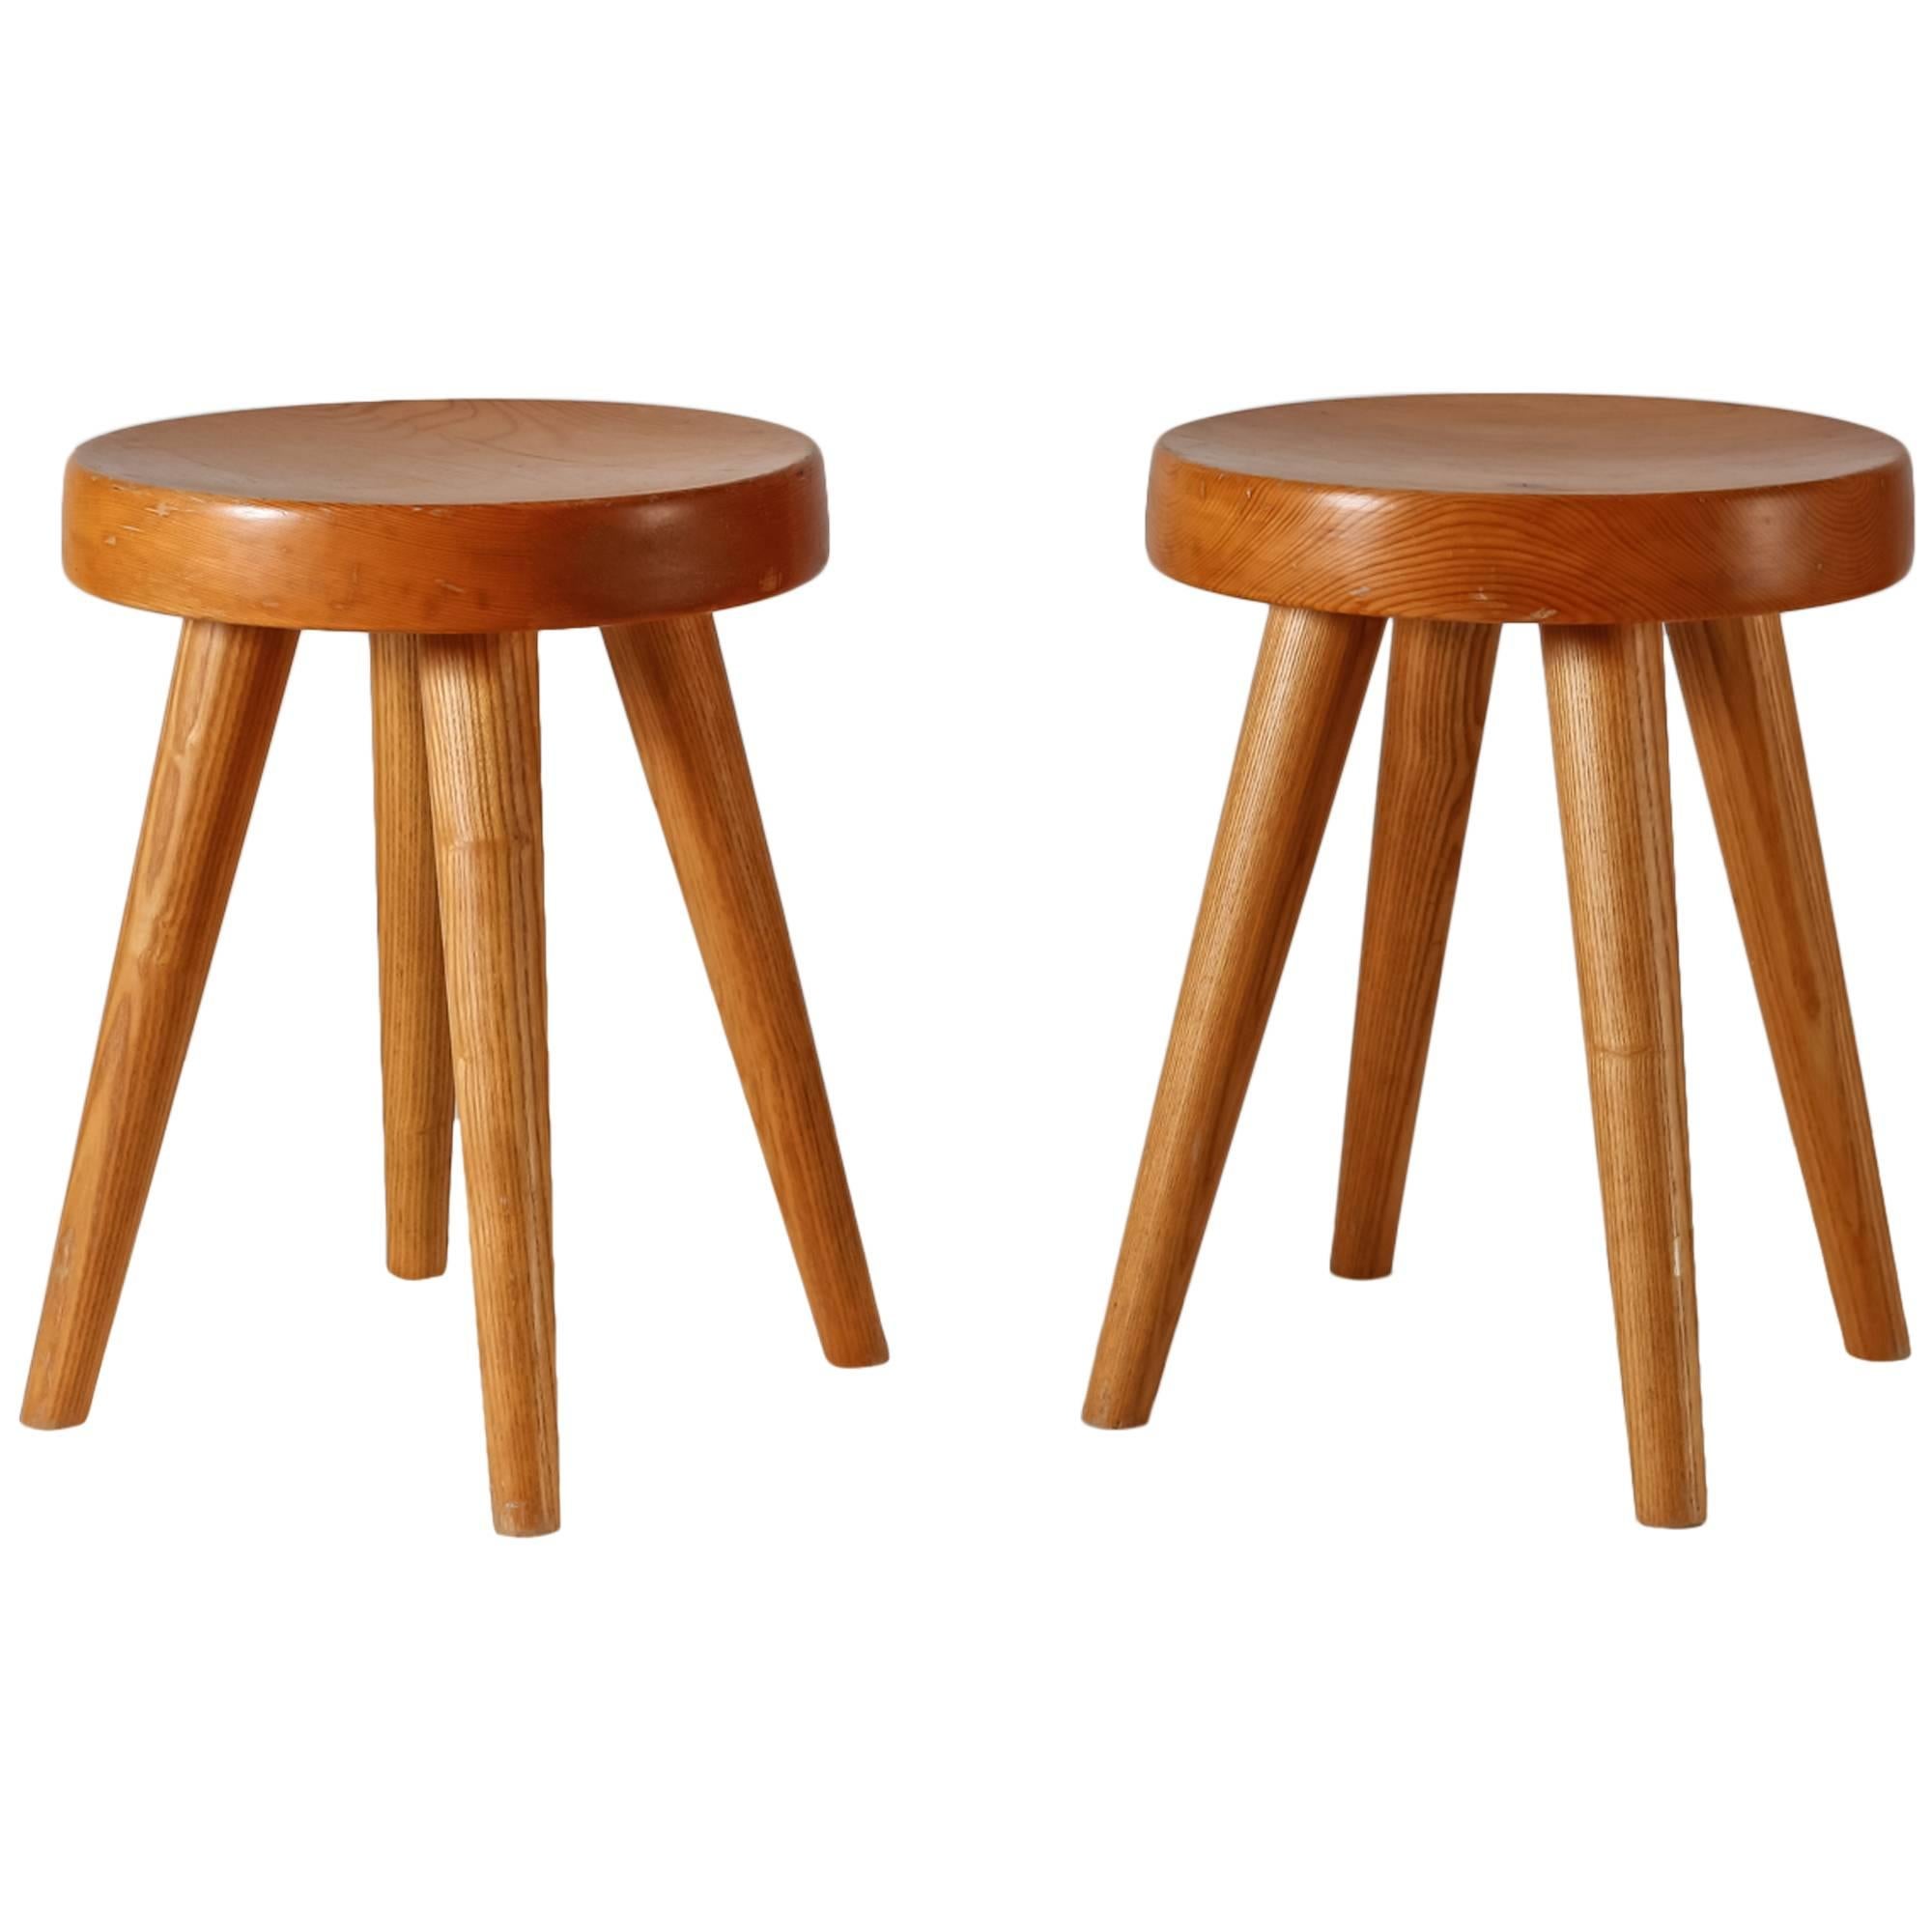 Charlotte Perriand Pair of Four-Legged Stools, France, 1960s For Sale